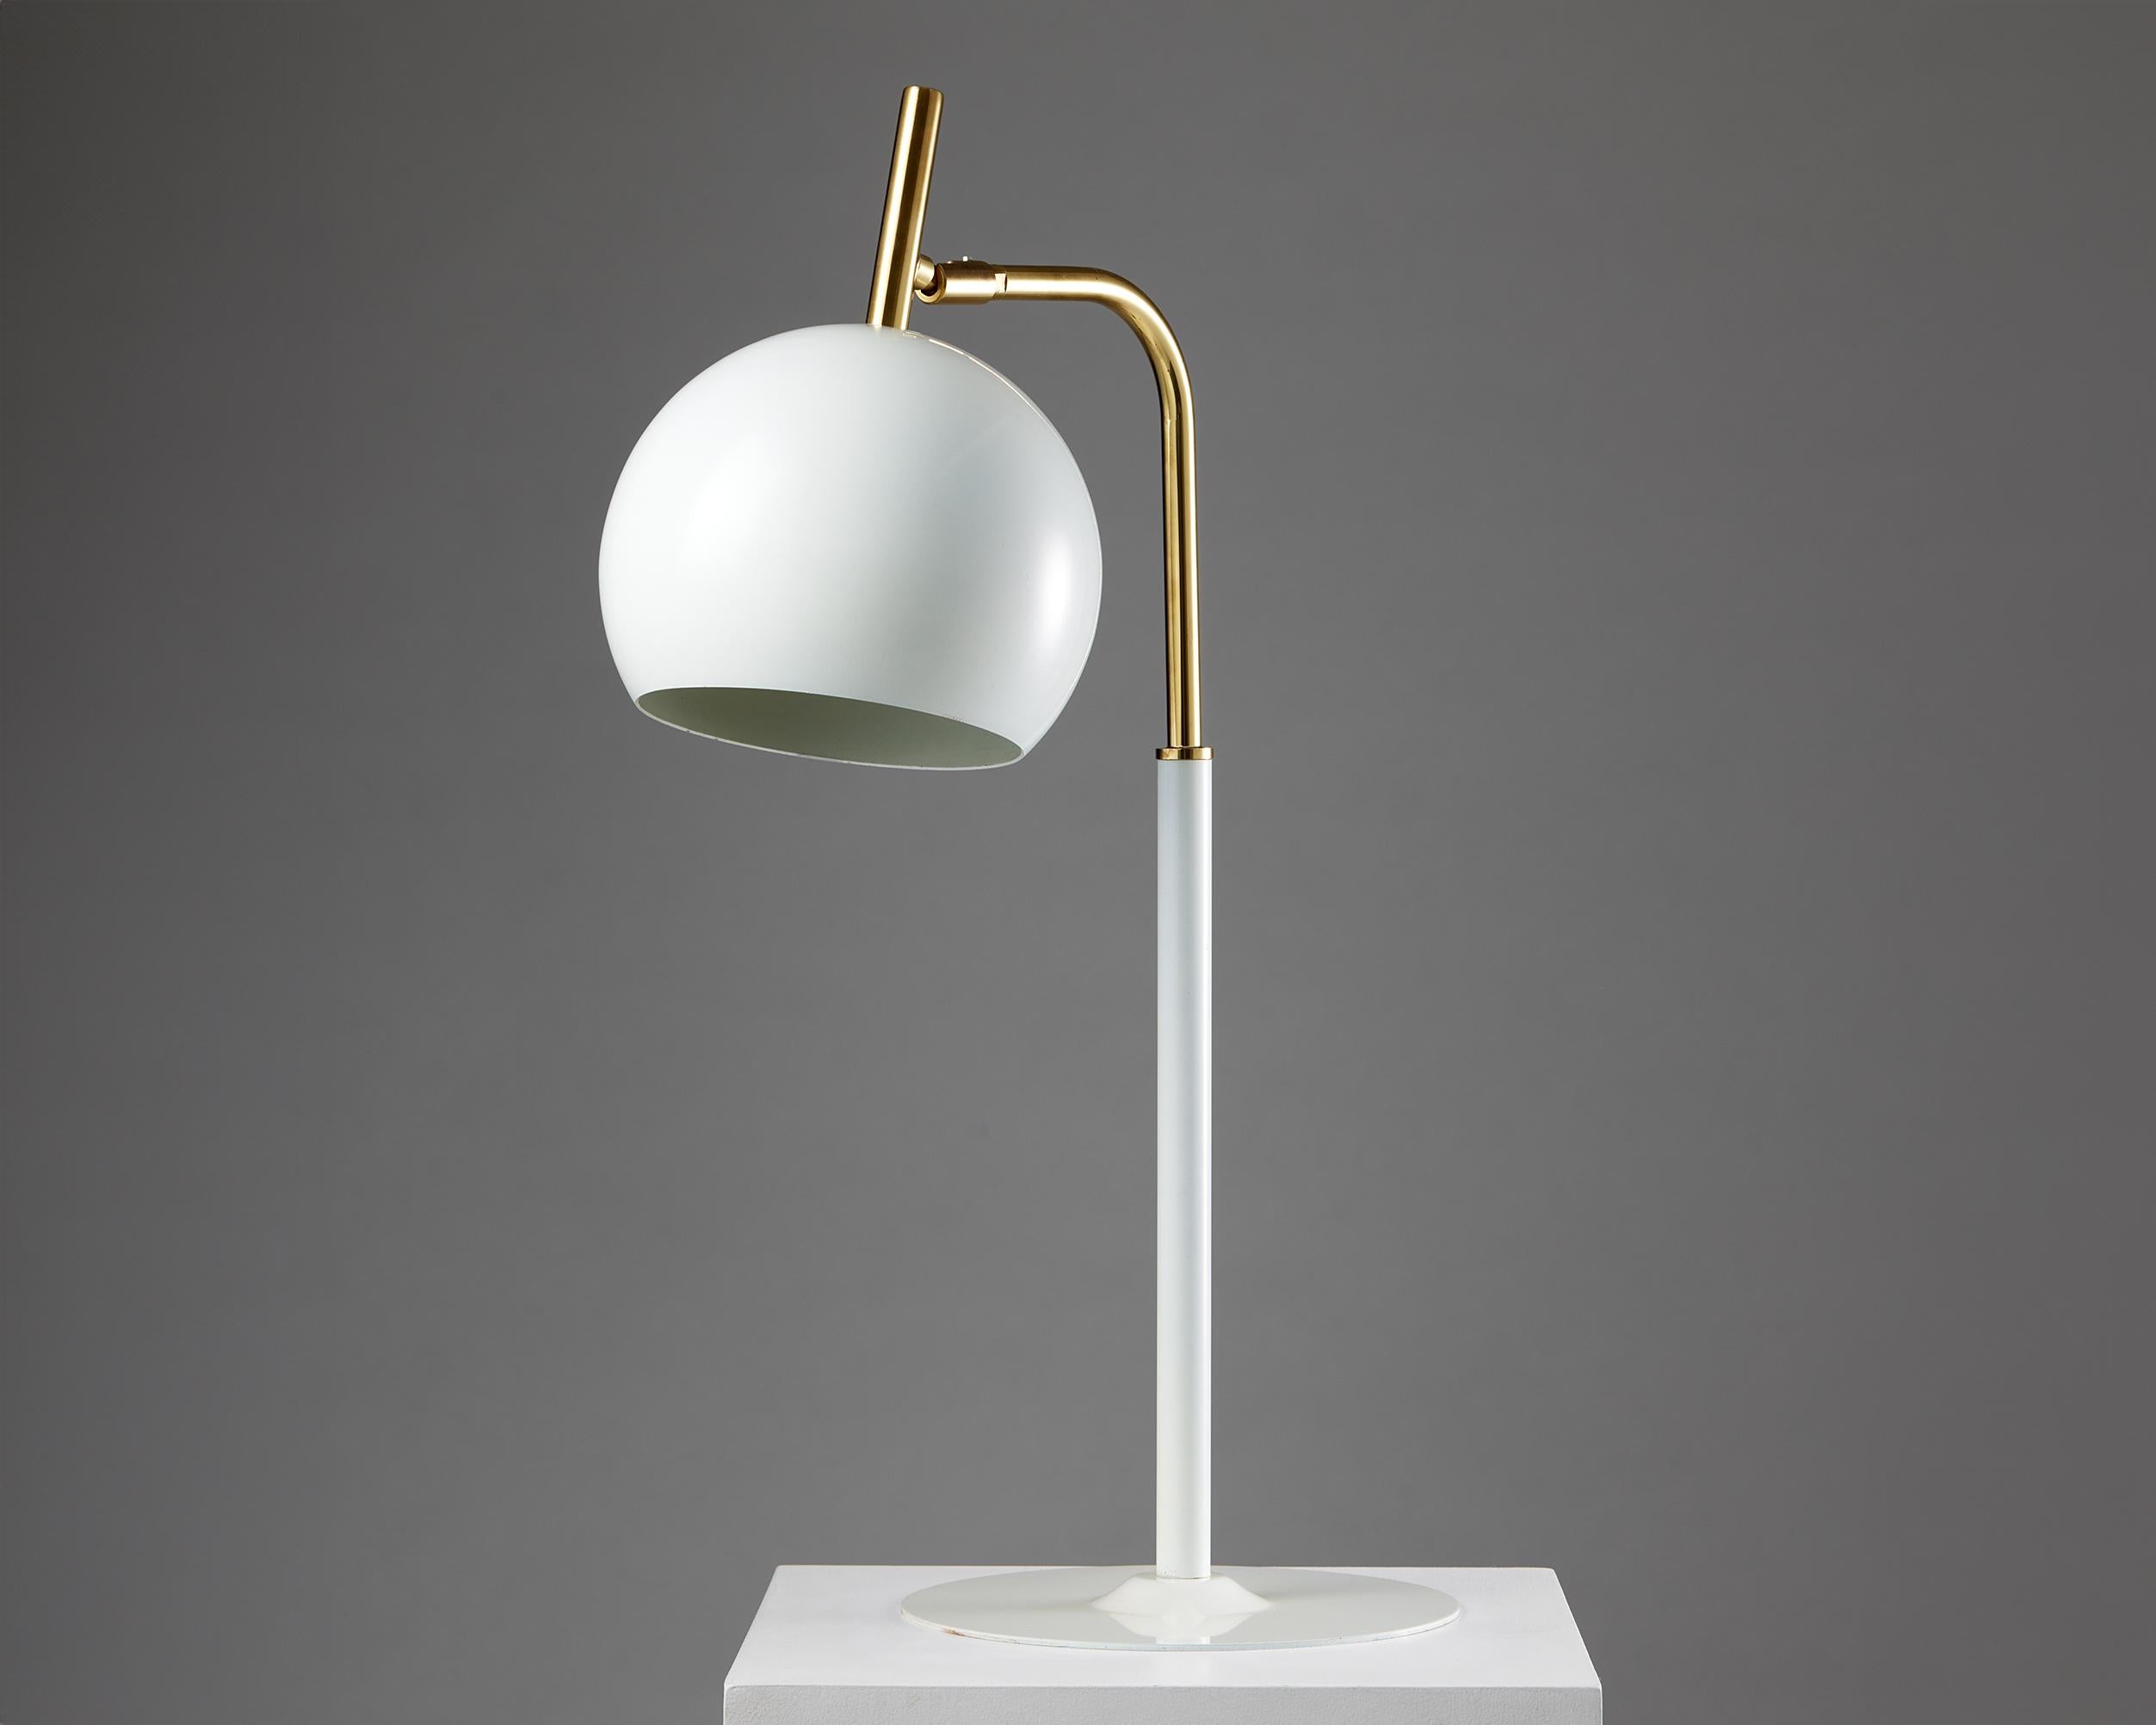 Table lamp model B 275 designed by Hans-Agne Jakobsson for Markaryd,
Sweden, 1960s.

Brass and white lacquered metal.

Stamped.

H: 70 cm
Diameter of the base: 26 cm 
Diameter of the shade: 22 cm